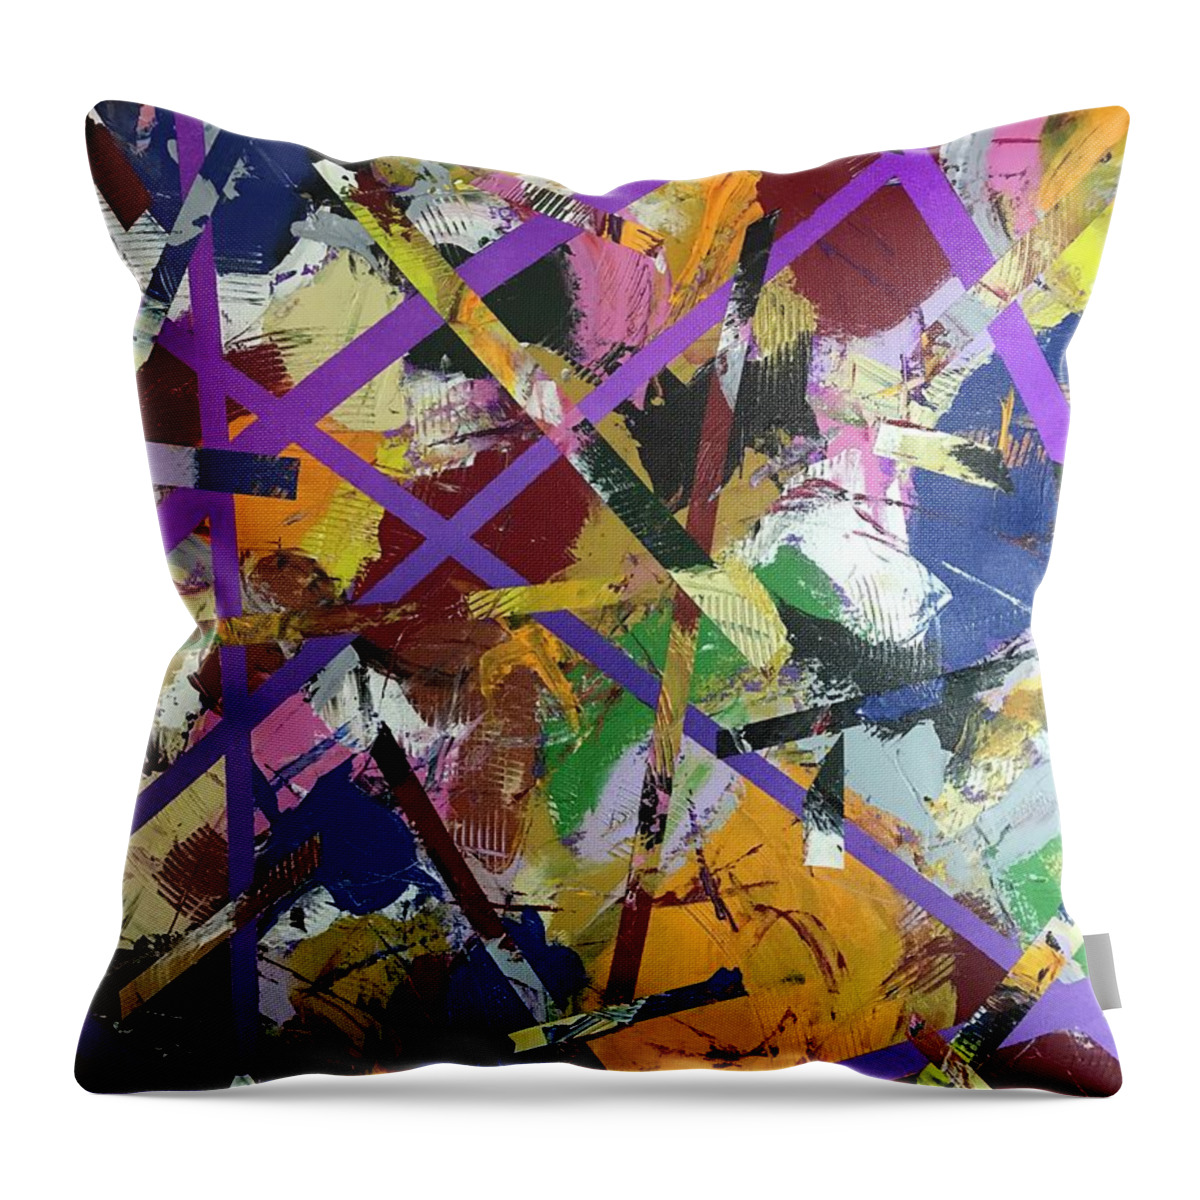 #abstractexpressionism #juliusdewitthannah #untitledseries #acrylicpainting Throw Pillow featuring the painting Untitled #4 by Julius Hannah